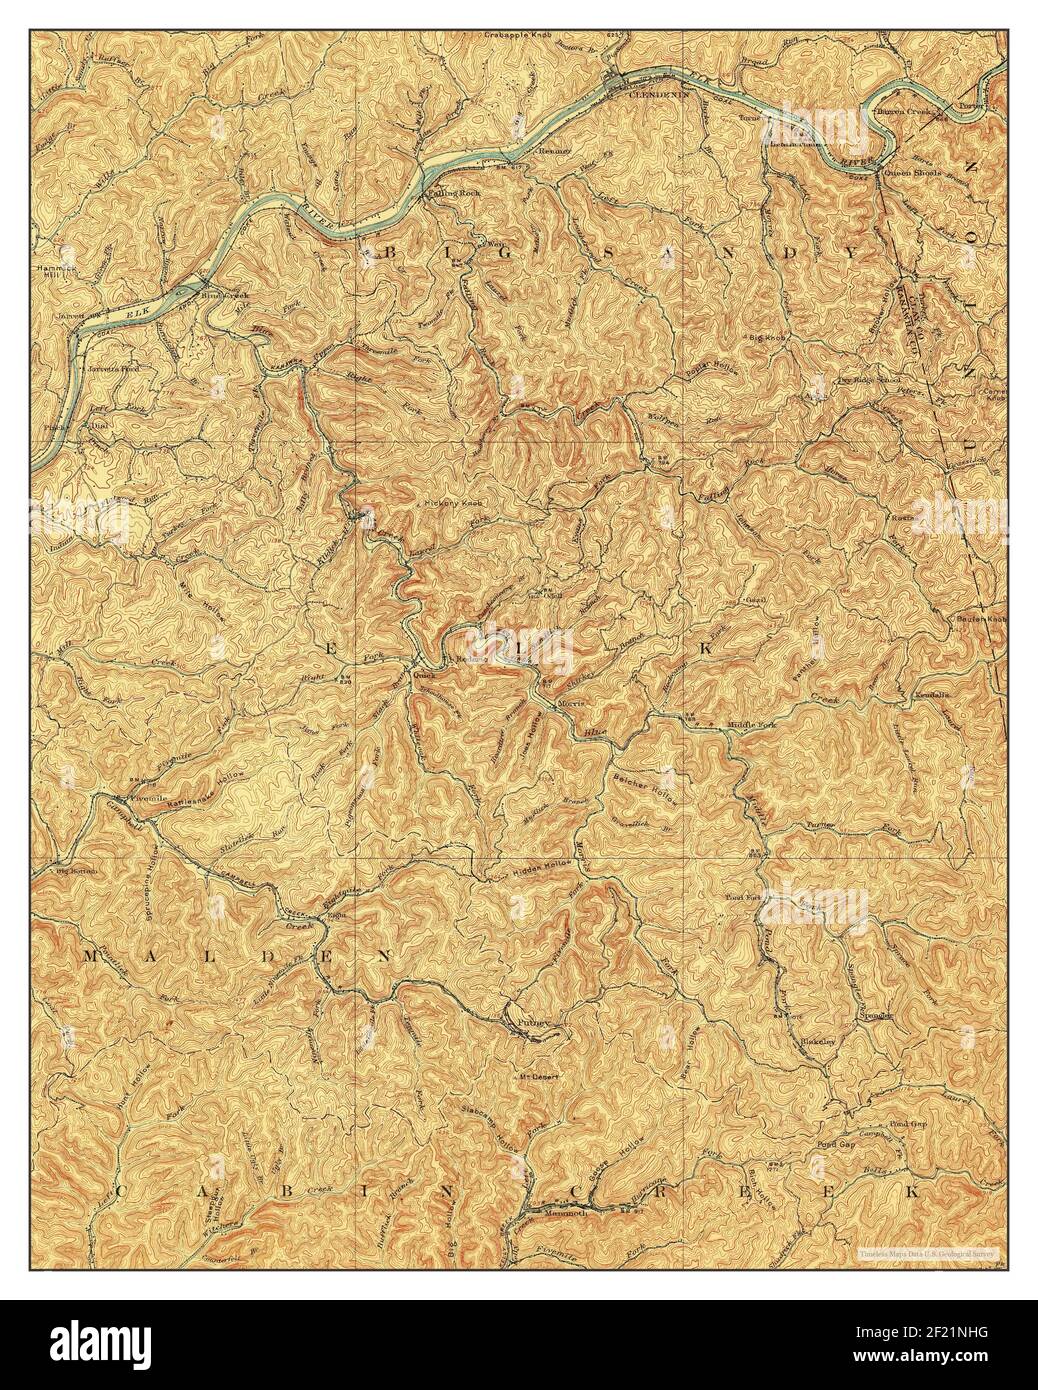 Clendenin, West Virginia, map 1909, 1:62500, United States of America by Timeless Maps, data U.S. Geological Survey Stock Photo